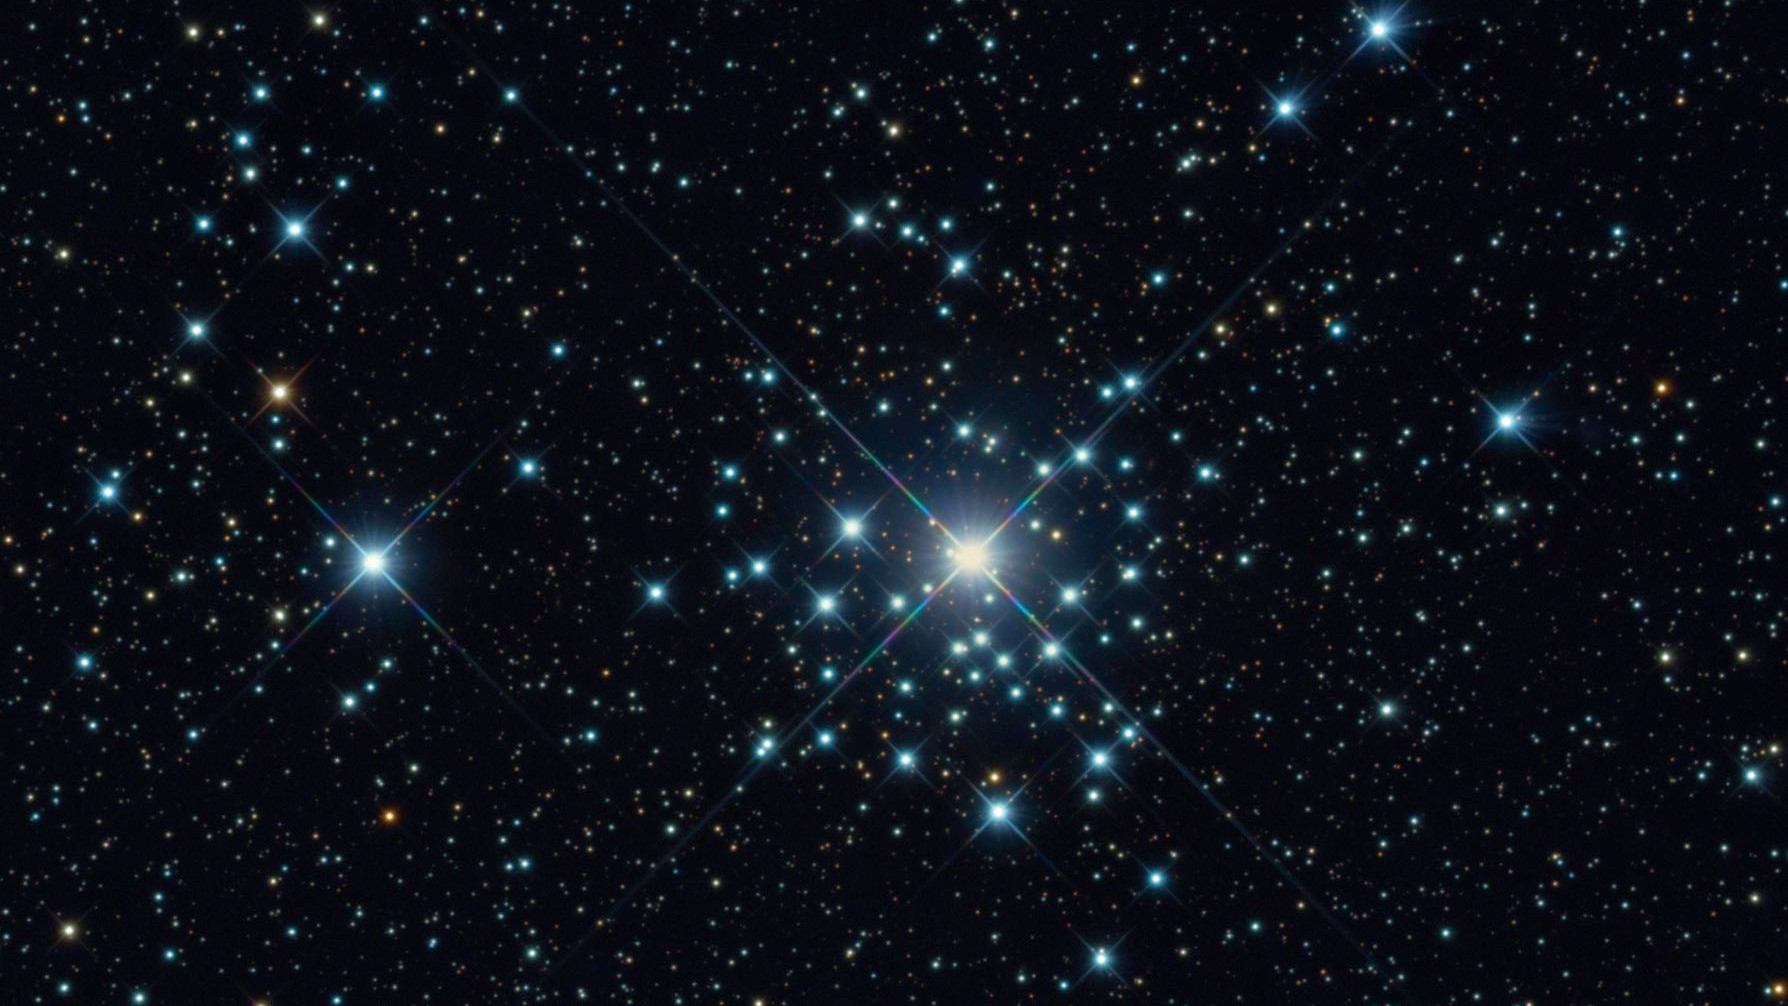 Cluster NGC 2362 in the constellation of Canis Major captured with a 20-inch RC telescope with a 4,492 mm focal length.
Bernhard Hubl and the CEDIC Team / CCD Guide